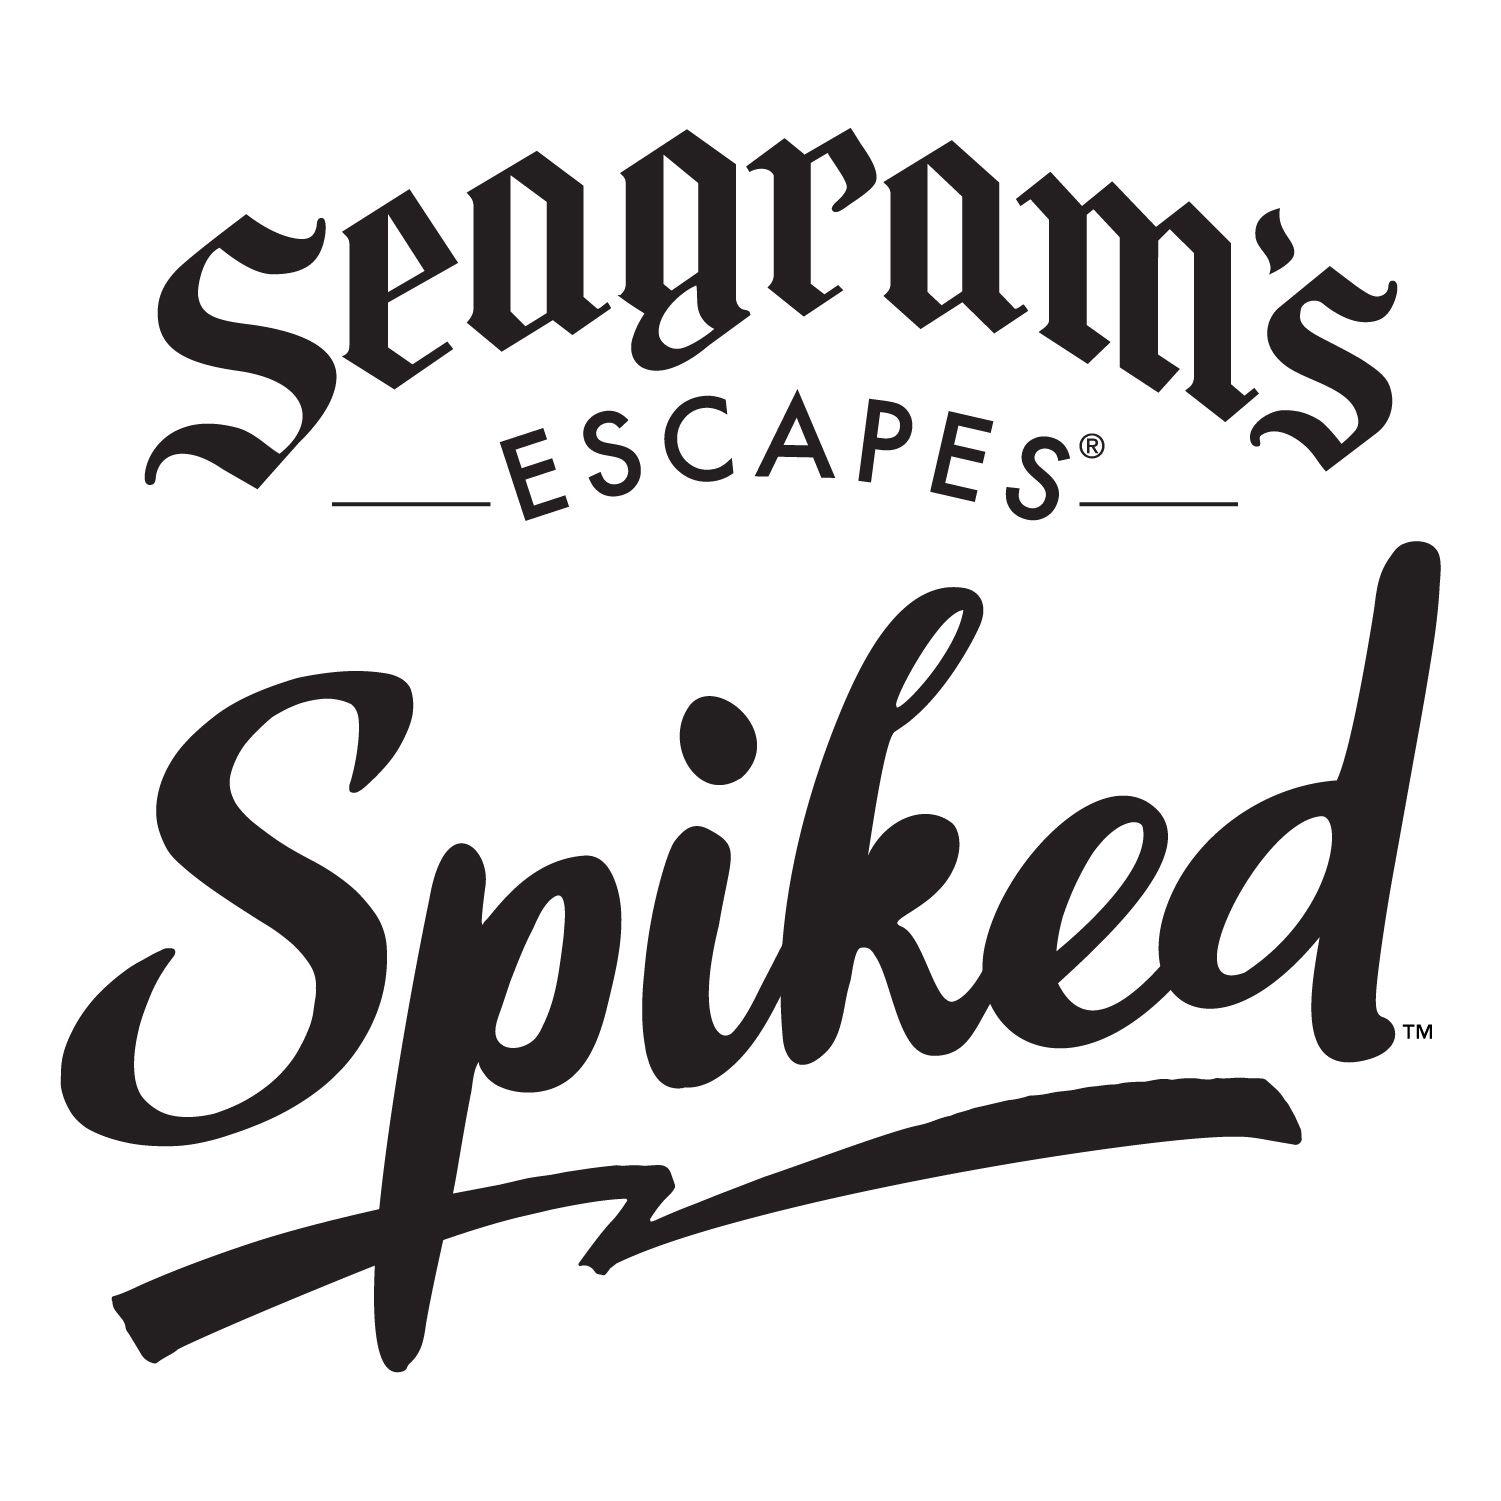 Seagram's Logo - Hot New Product 'Turns Up' the Party | Newswire